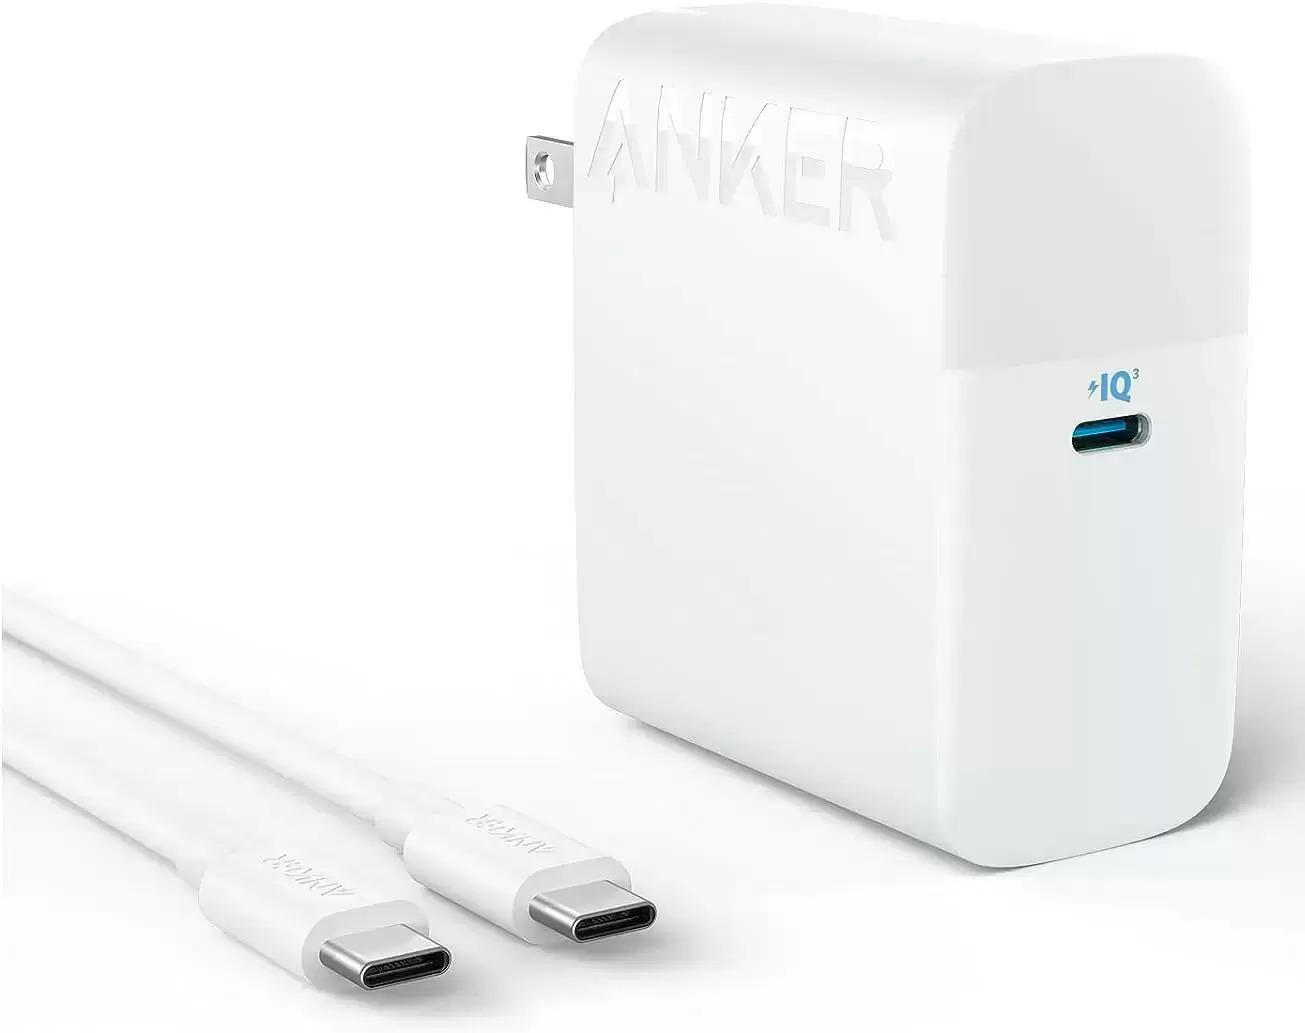 Anker 317 100W Charger with USB-C Cable for $25.49